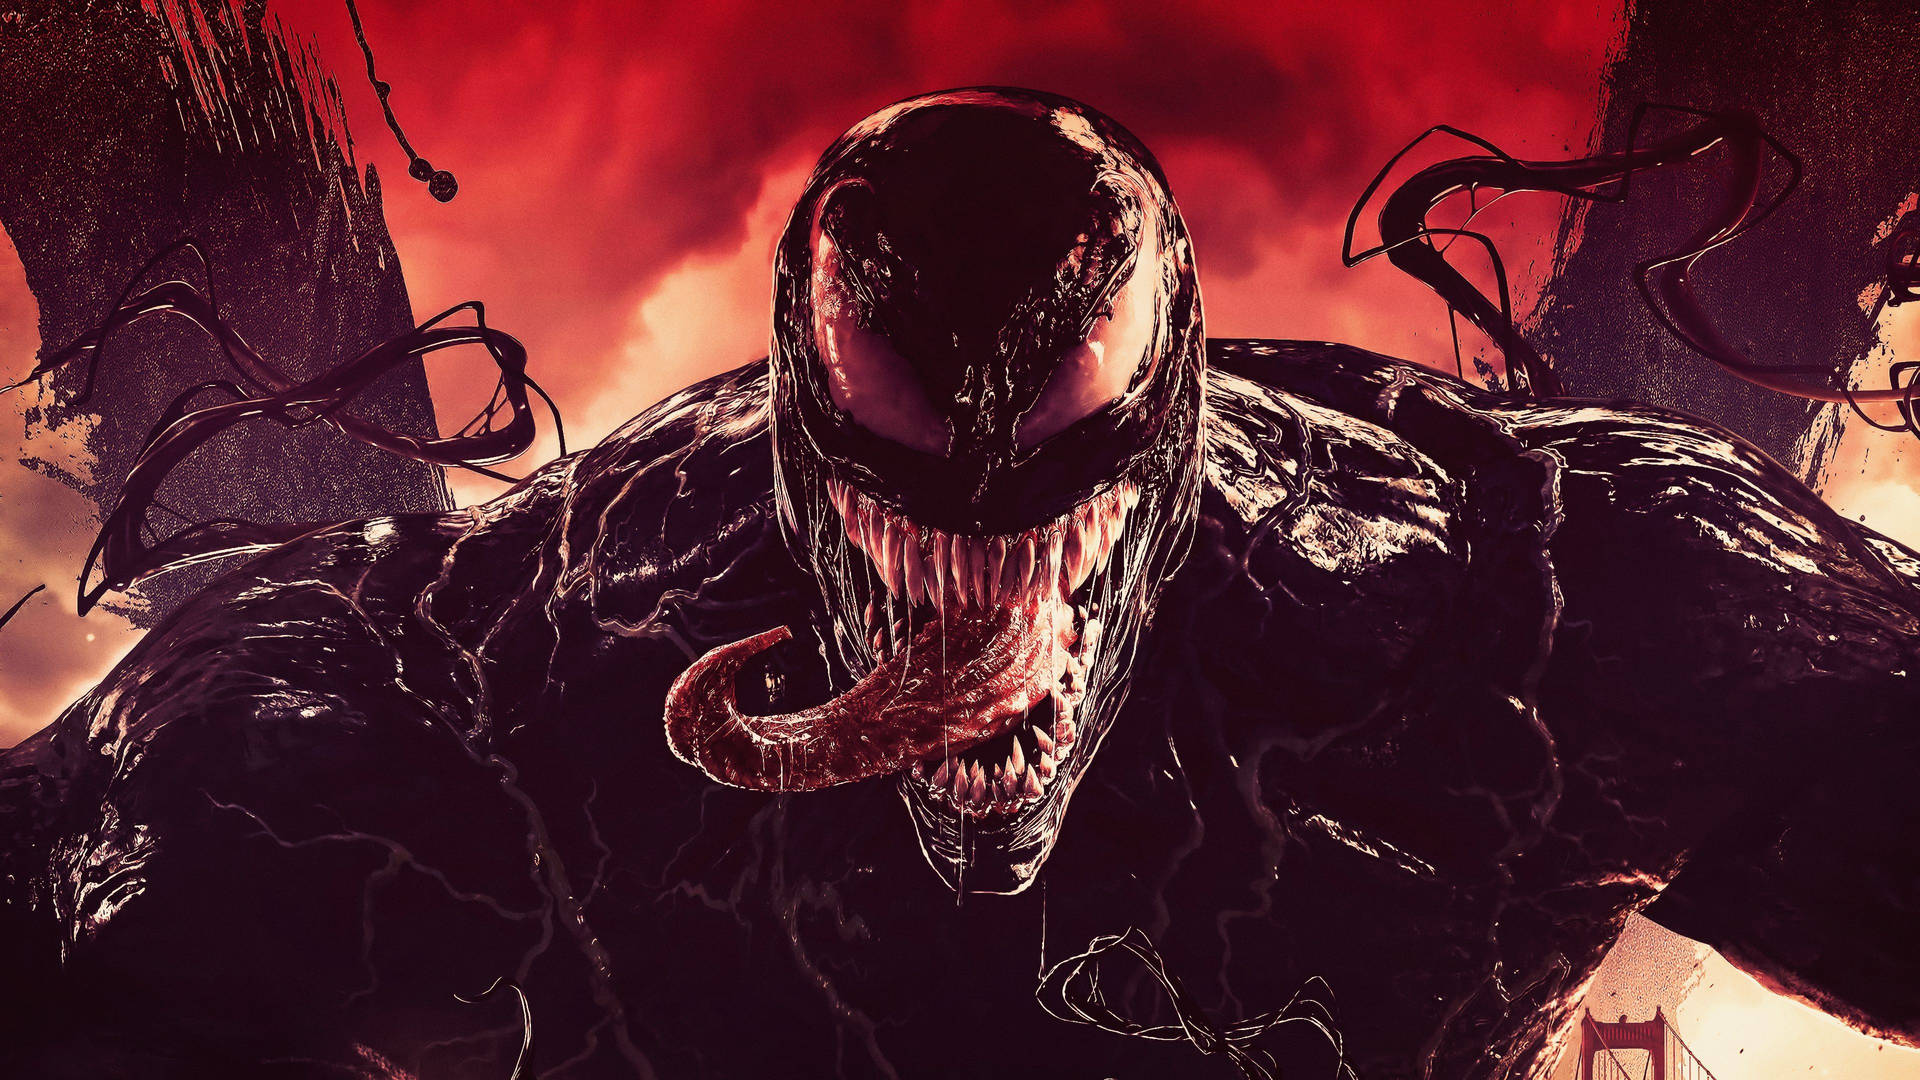 Carnage joining forces with Venom Wallpaper